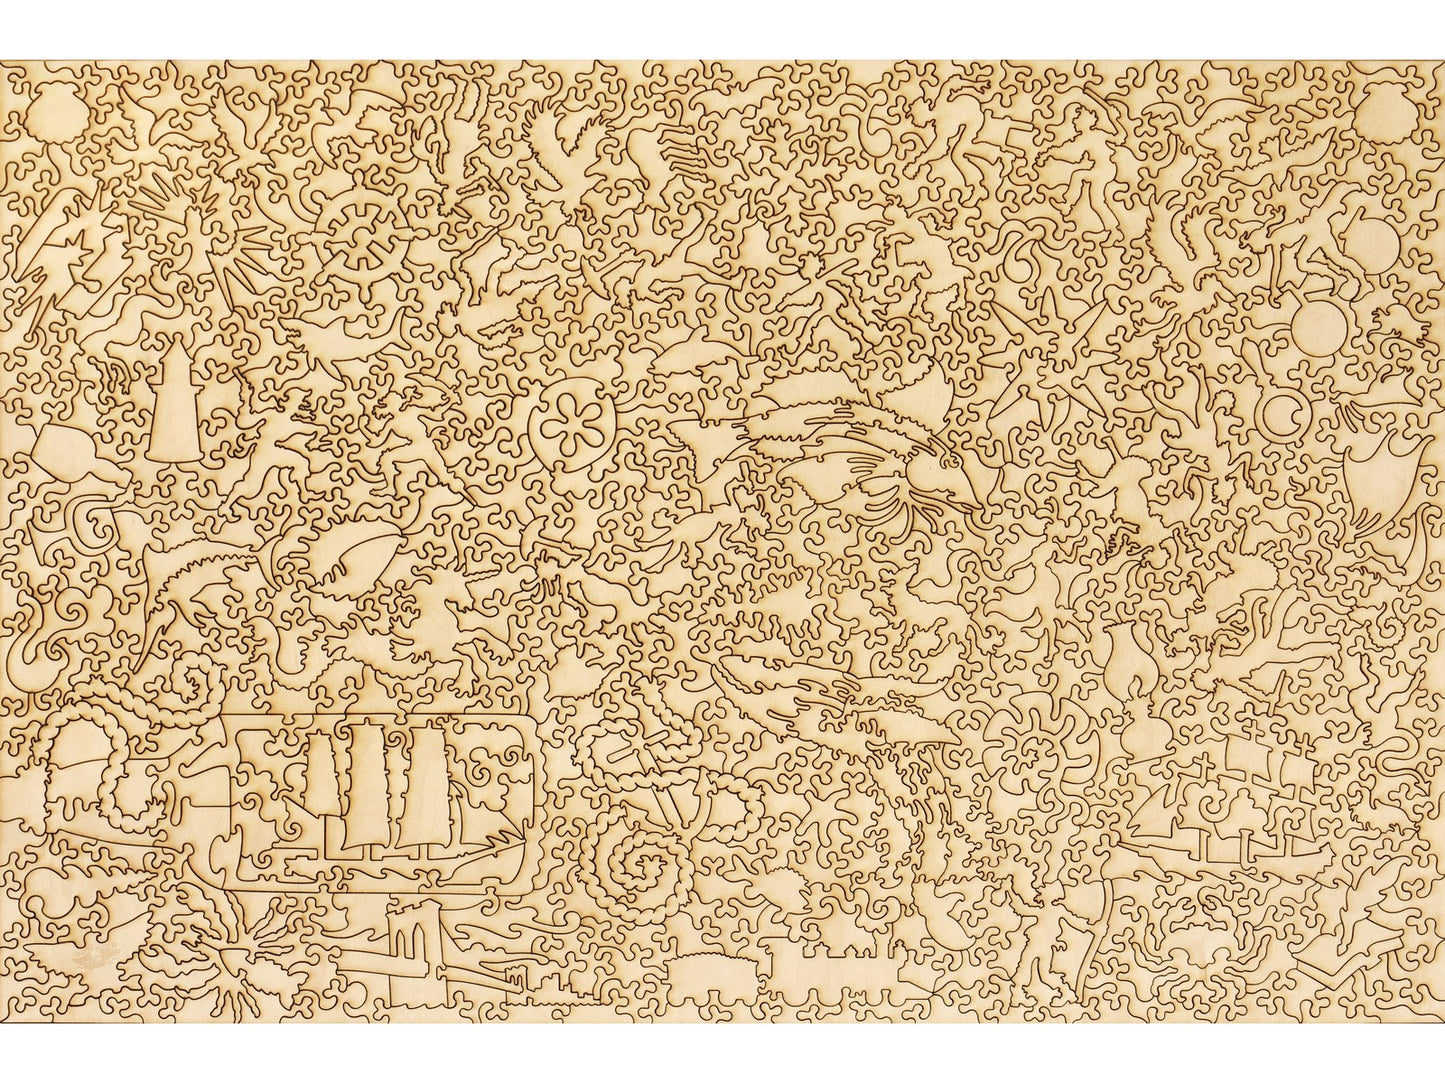 The back of the puzzle, Map of Long Island.